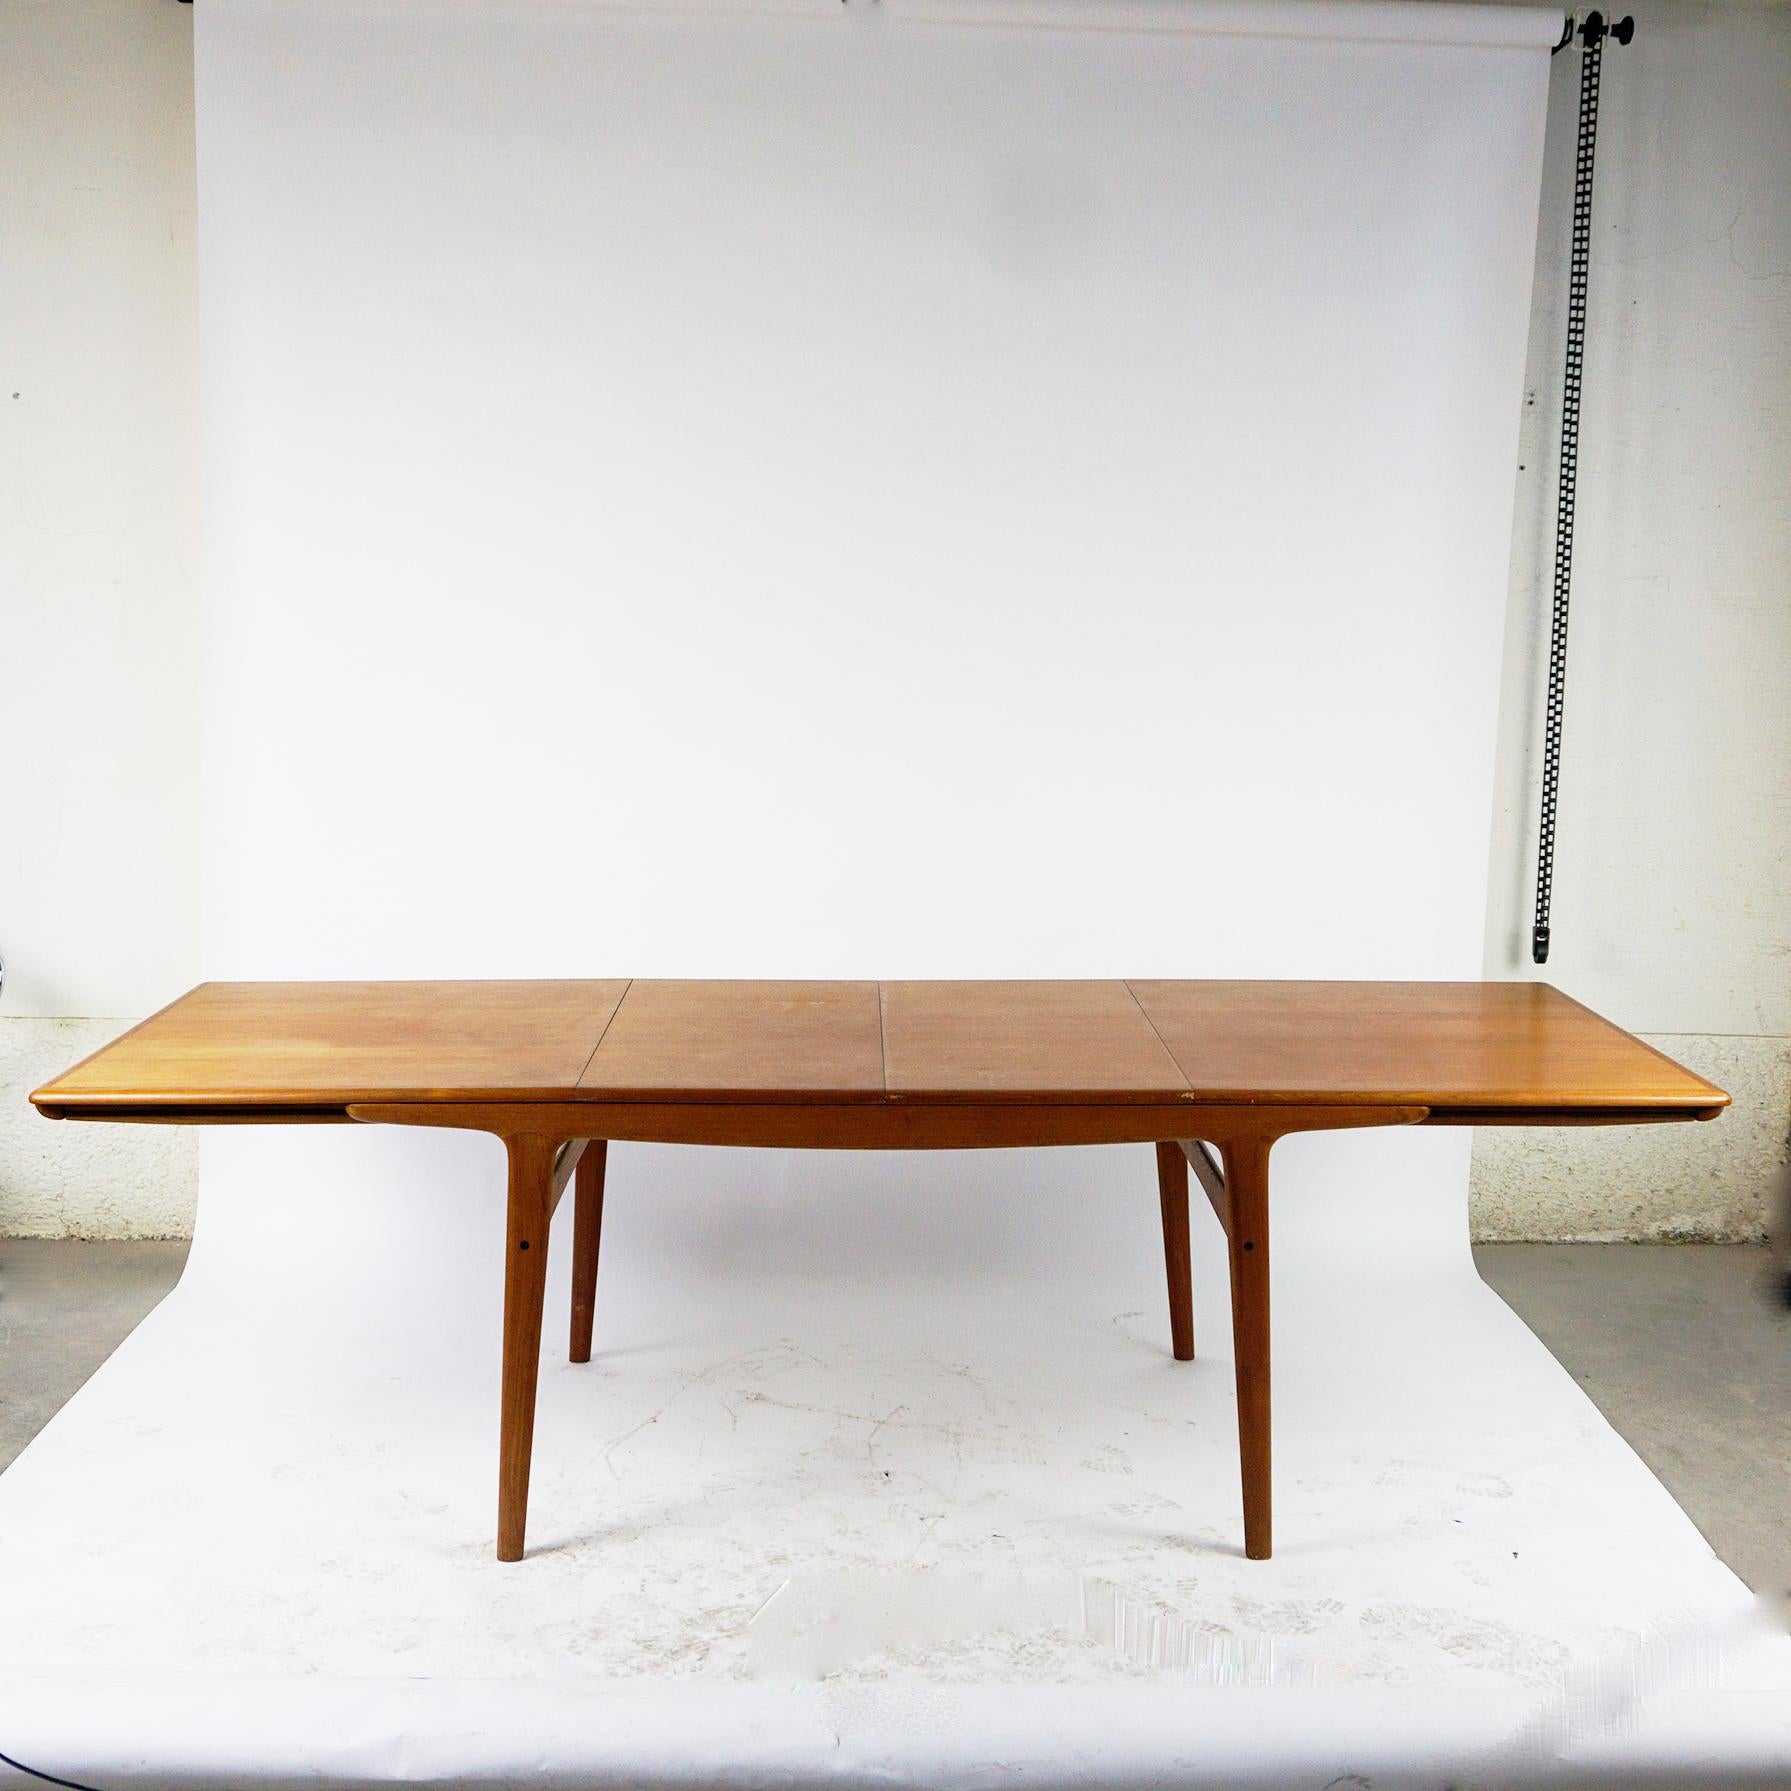 This excellent scandinavian teak dining table was designed by Arne Hovmand-Olsen for Mogens Kold, in Denmark during the 1960s. It is made of teak and has two separate extensions. Designed with a very organic shape. It can seat up to 8-10 people